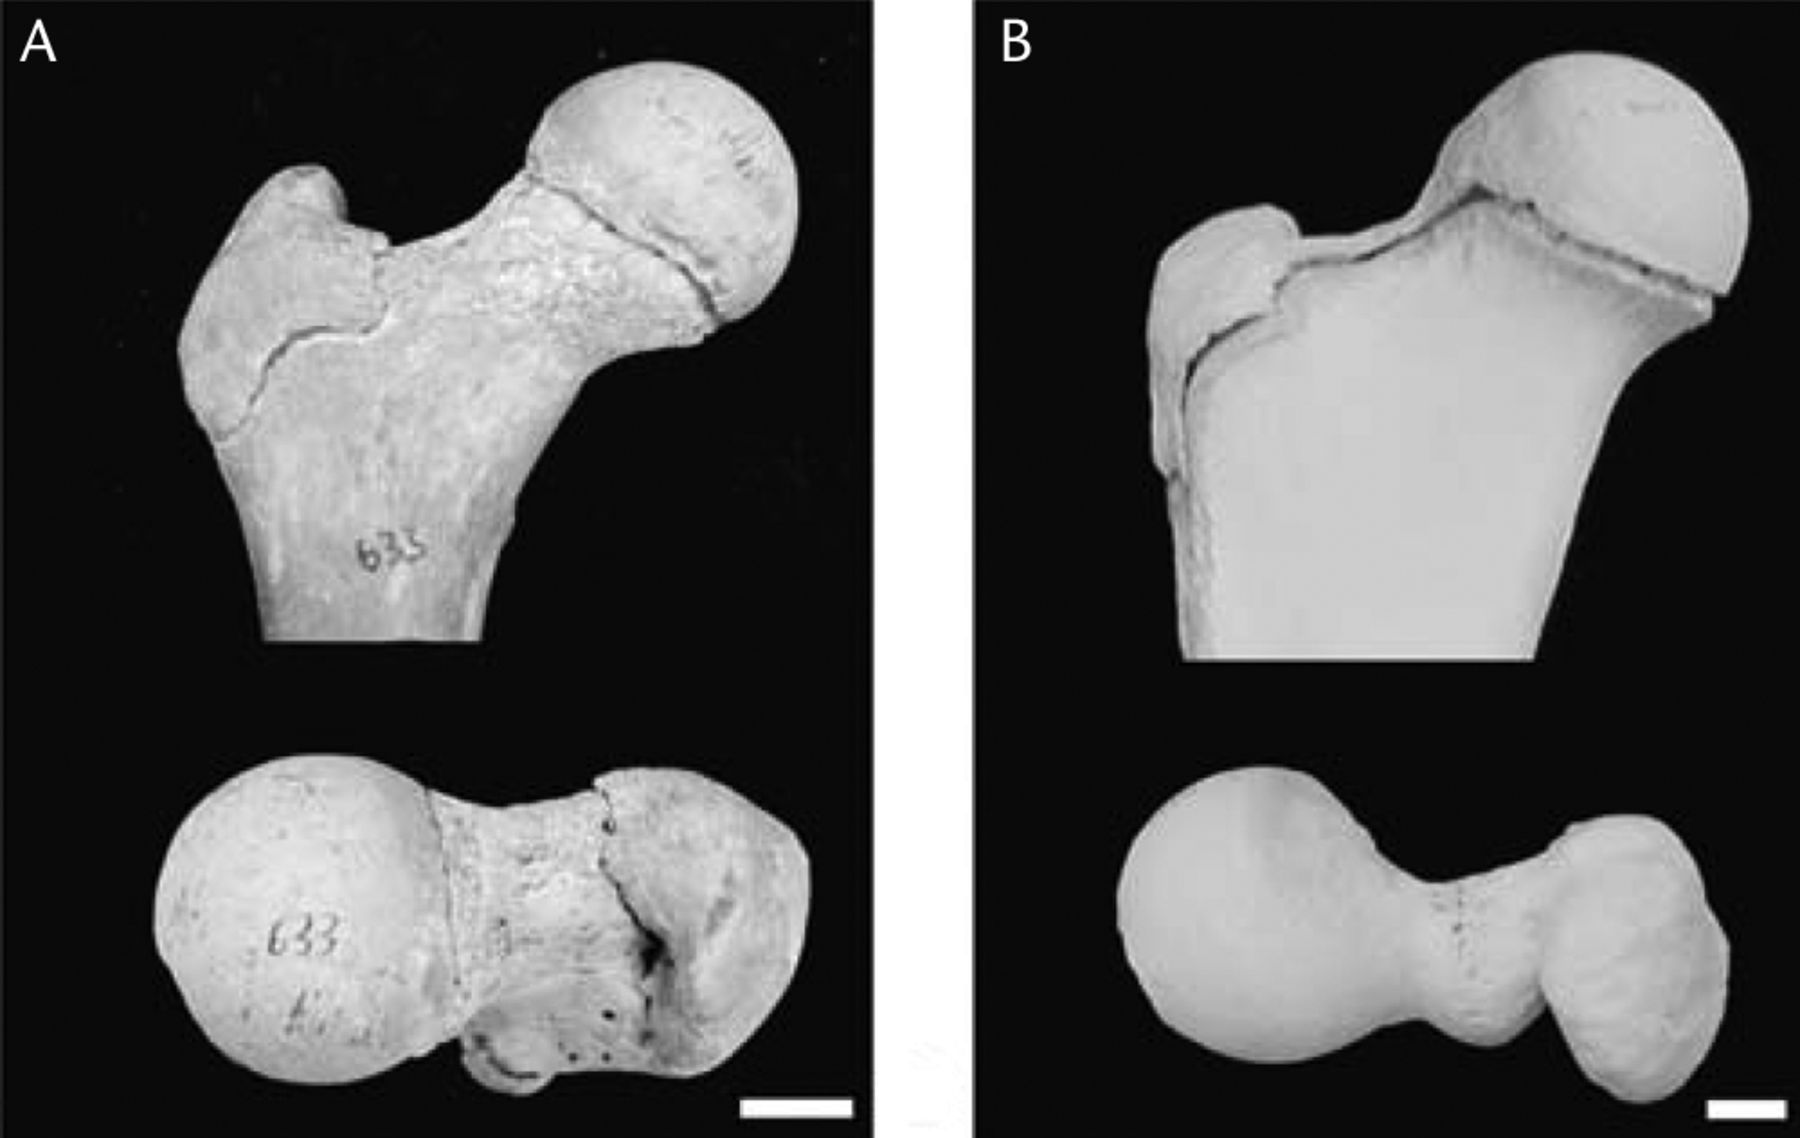 Fig. 3 
            Examples of separate and coalesced epiphyses
during development of the proximal femur. At the end of growth,
humans (A) have separation of the femoral capital epiphysis and
the trochanteric apophysis, resulting in a rounder femoral head and
longer femoral neck. Most quadripedal mammals (B) have coalescence
at the proximal femur, resulting in a shorter, stouter femoral neck,
which is more stable but with a smaller range of movement. (Reprinted
with permission: Serrat et al. Variation in mammalian
proximal femoral development: comparative analysis of two distinct
ossification patterns. J Anat 2007;210:249–258).
          